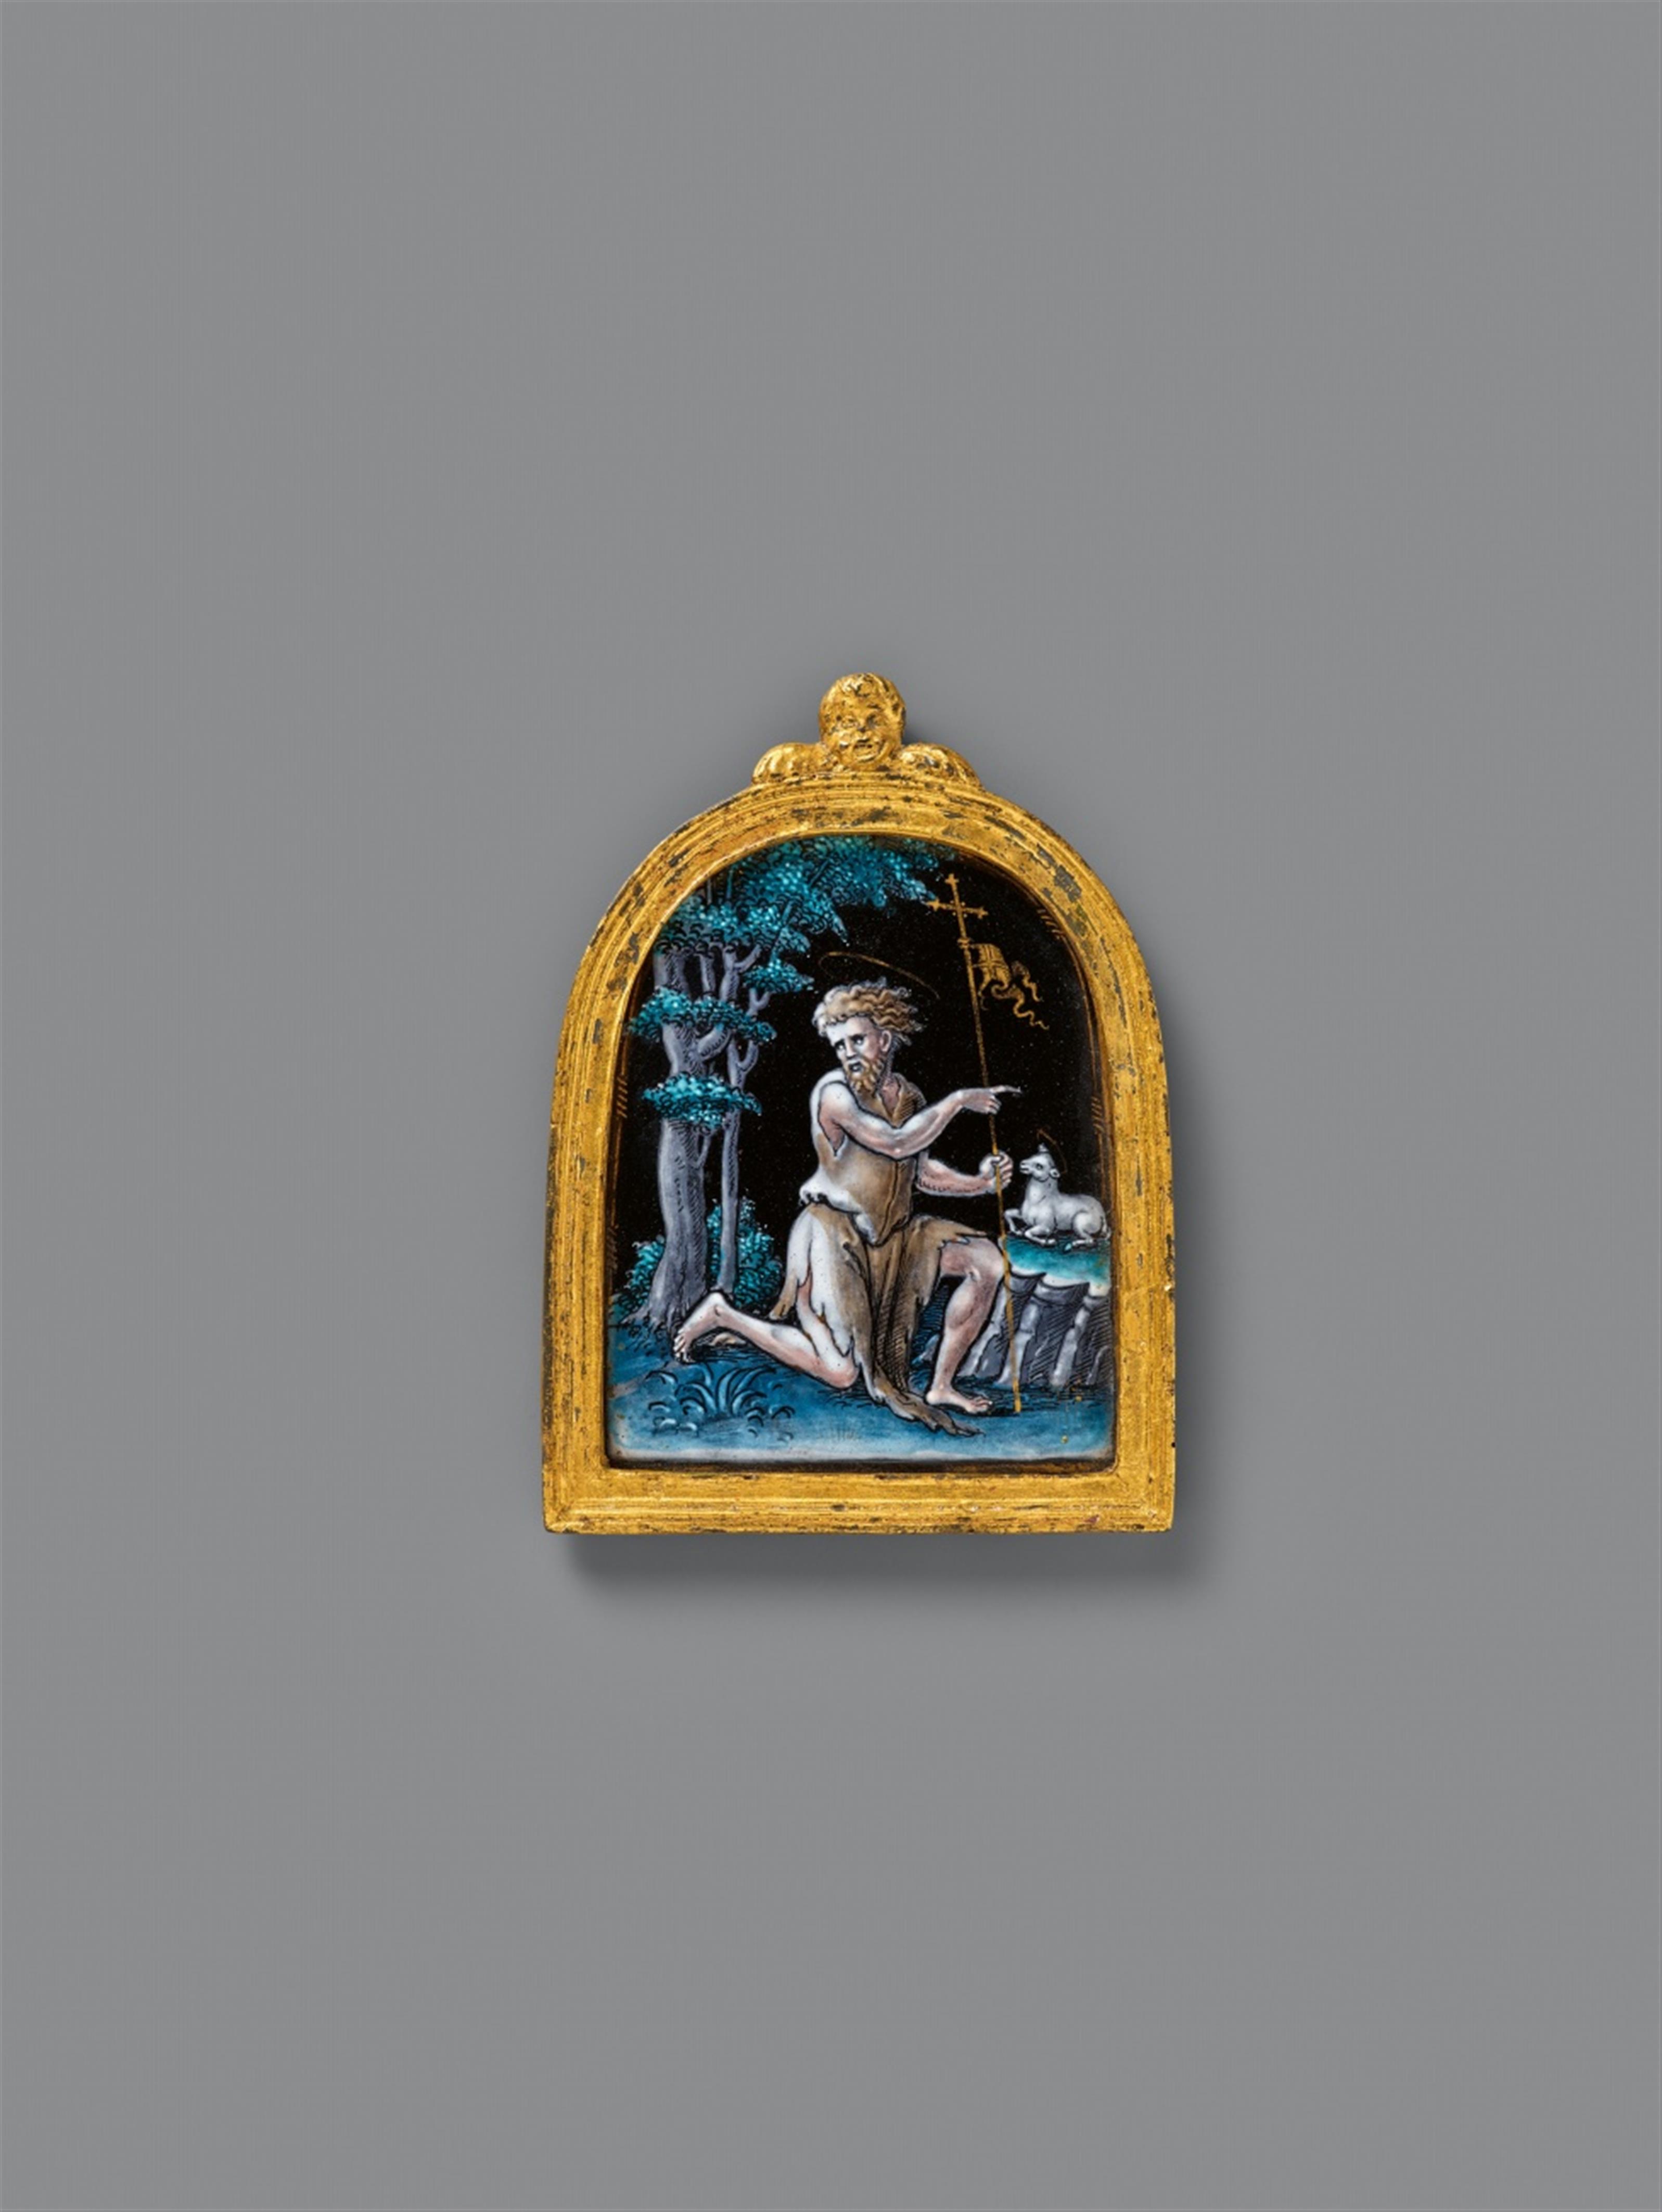 Limoges mid-16th century - A mid-16th century Limoges enamel plaque with Saint John the Baptist - image-1